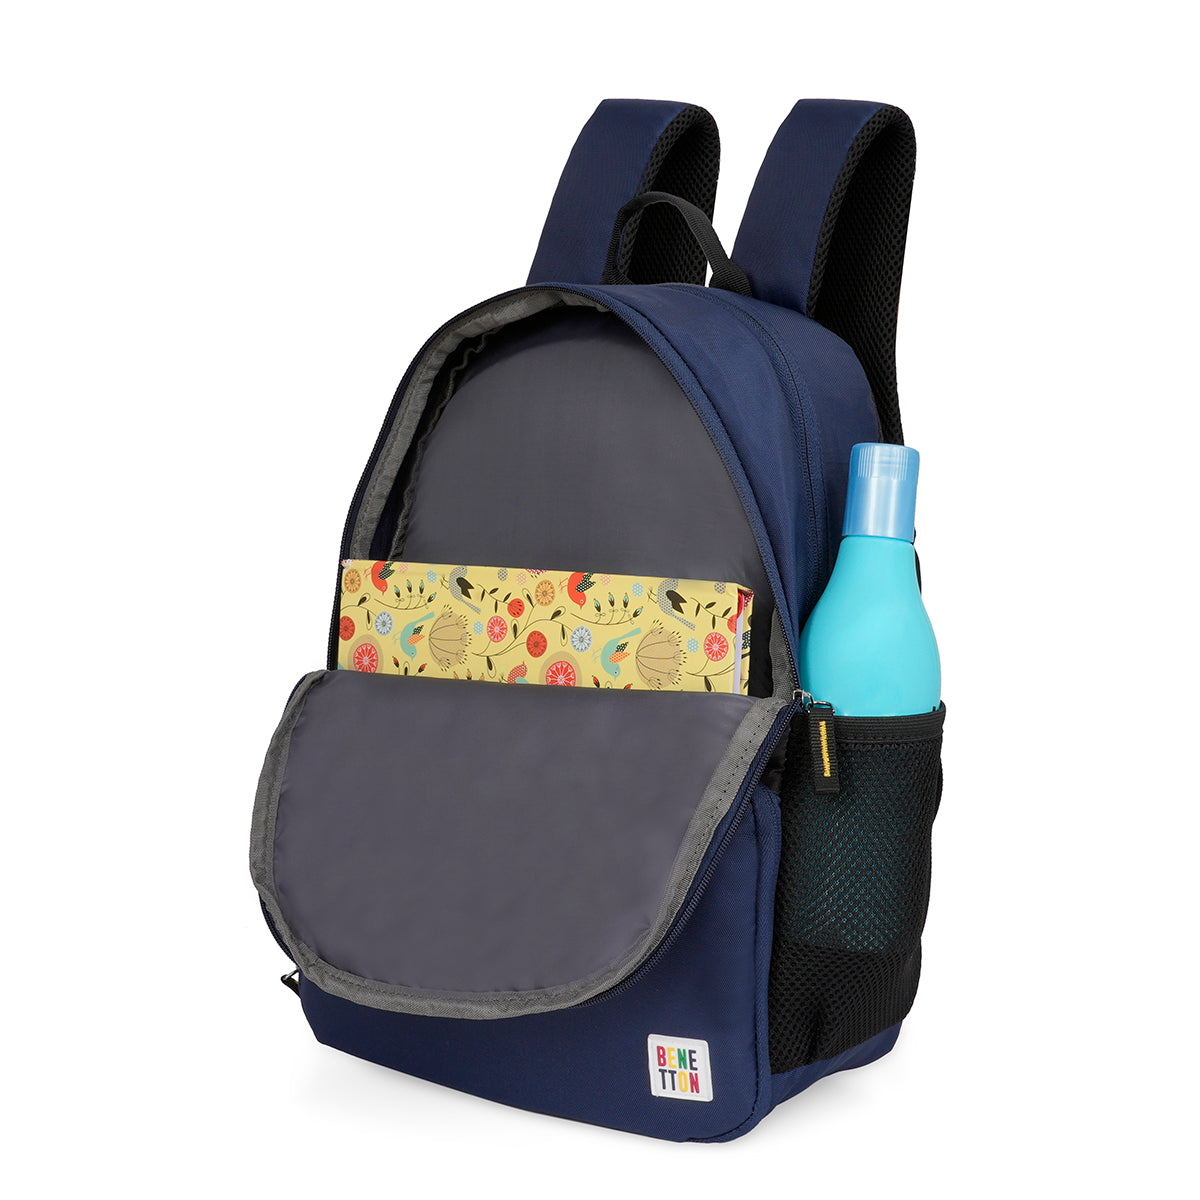 United Colors of Benetton Breeze Back to School Backpack Navy